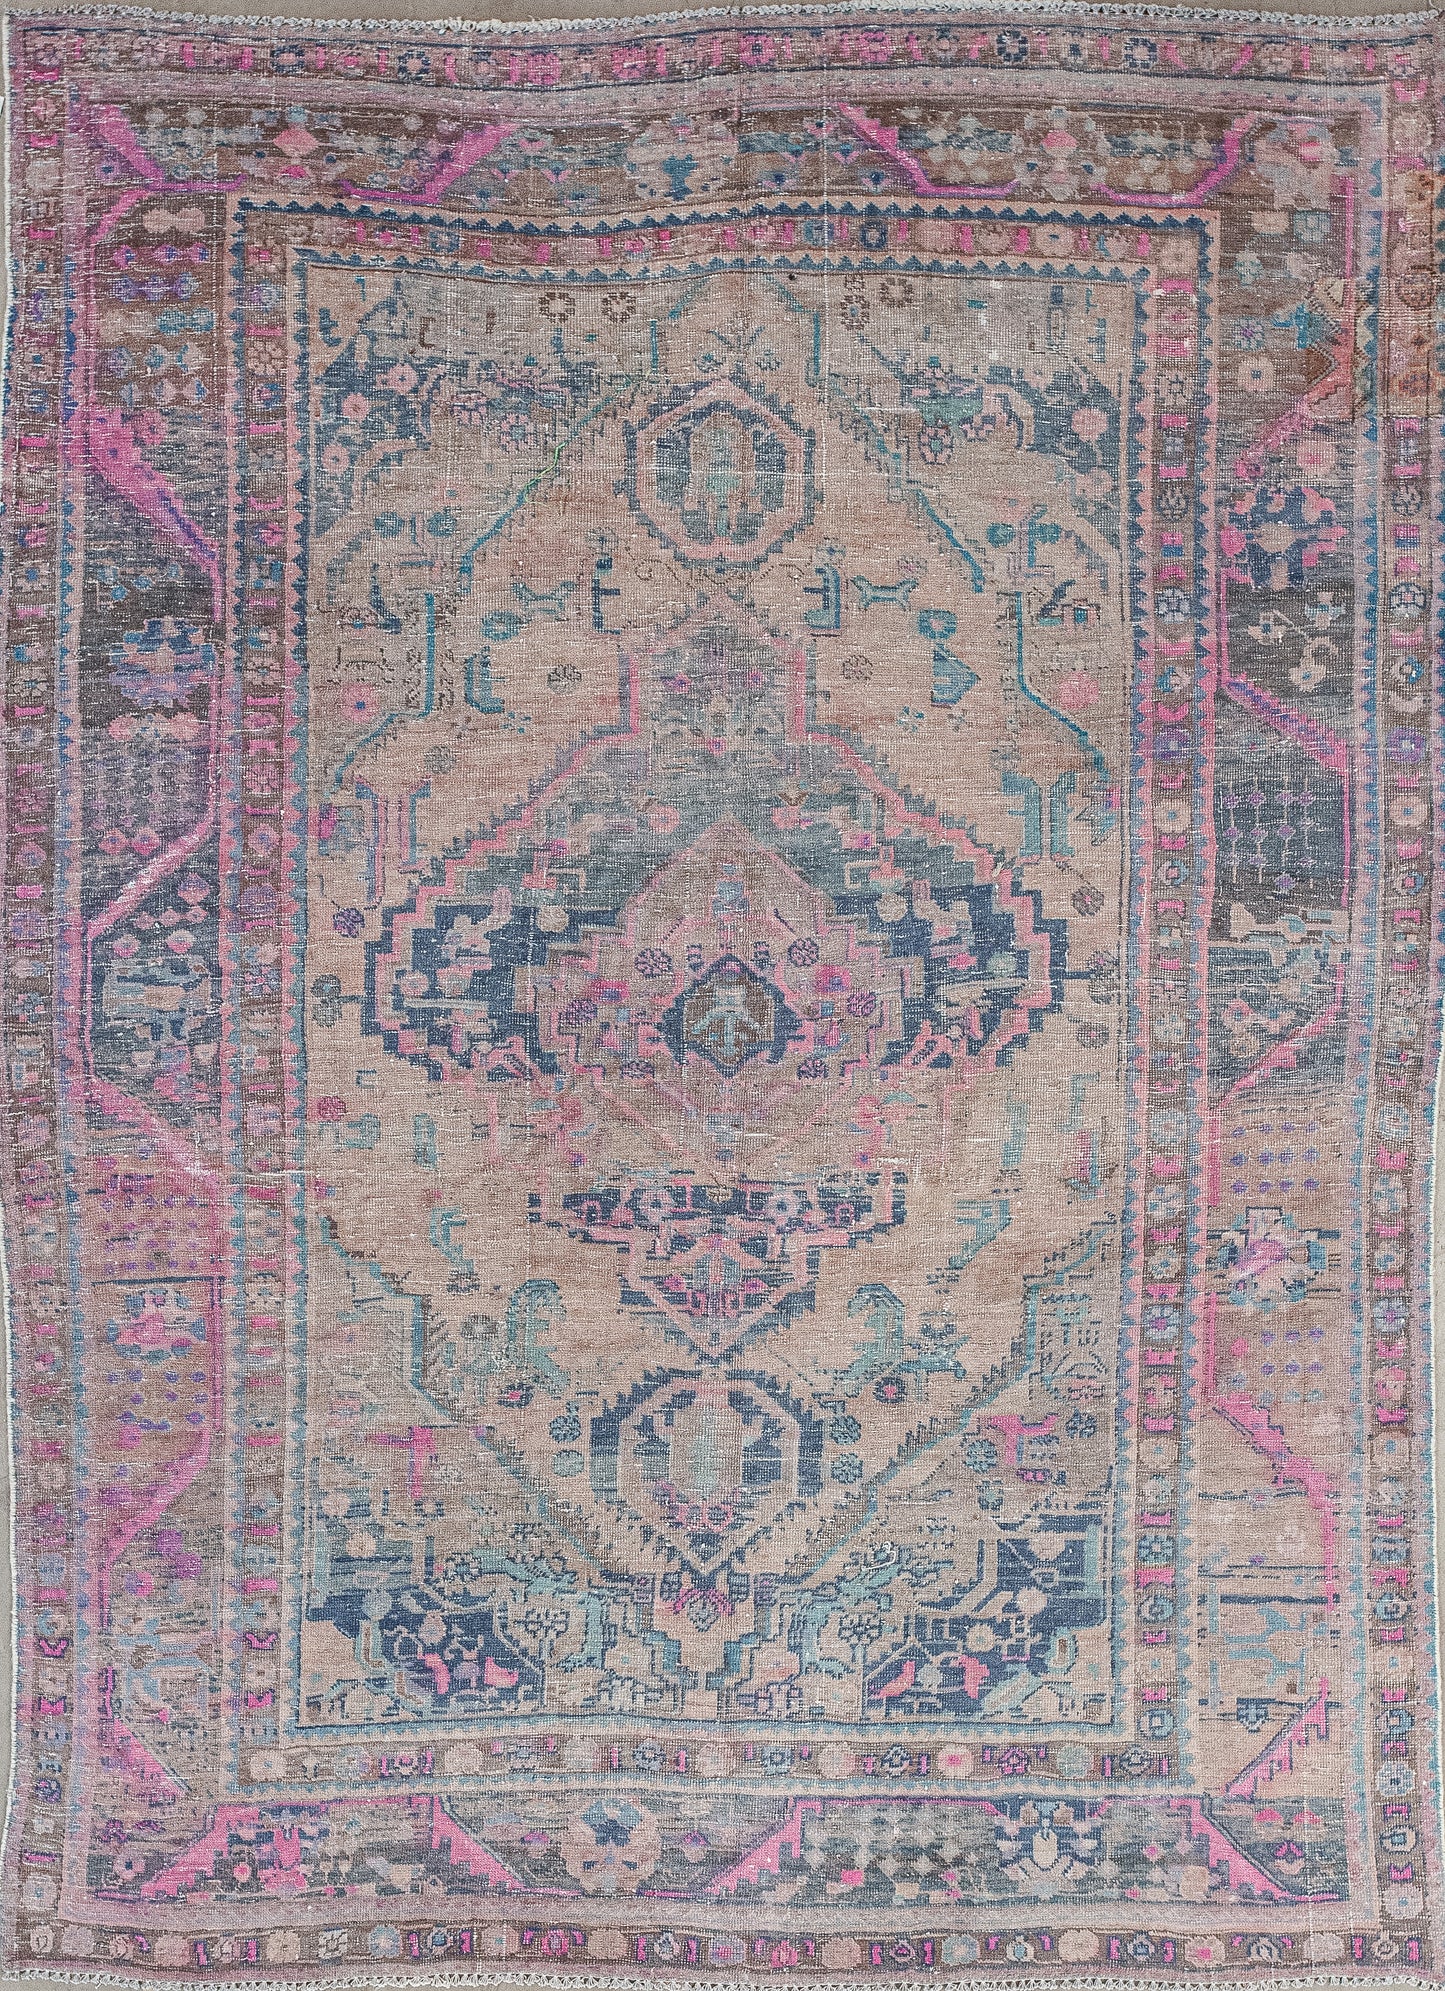 This feminine carpet was woven to attract love and kindness into your space. The mixed palette comes with pink, green, gray, and mostly beige for the central background.